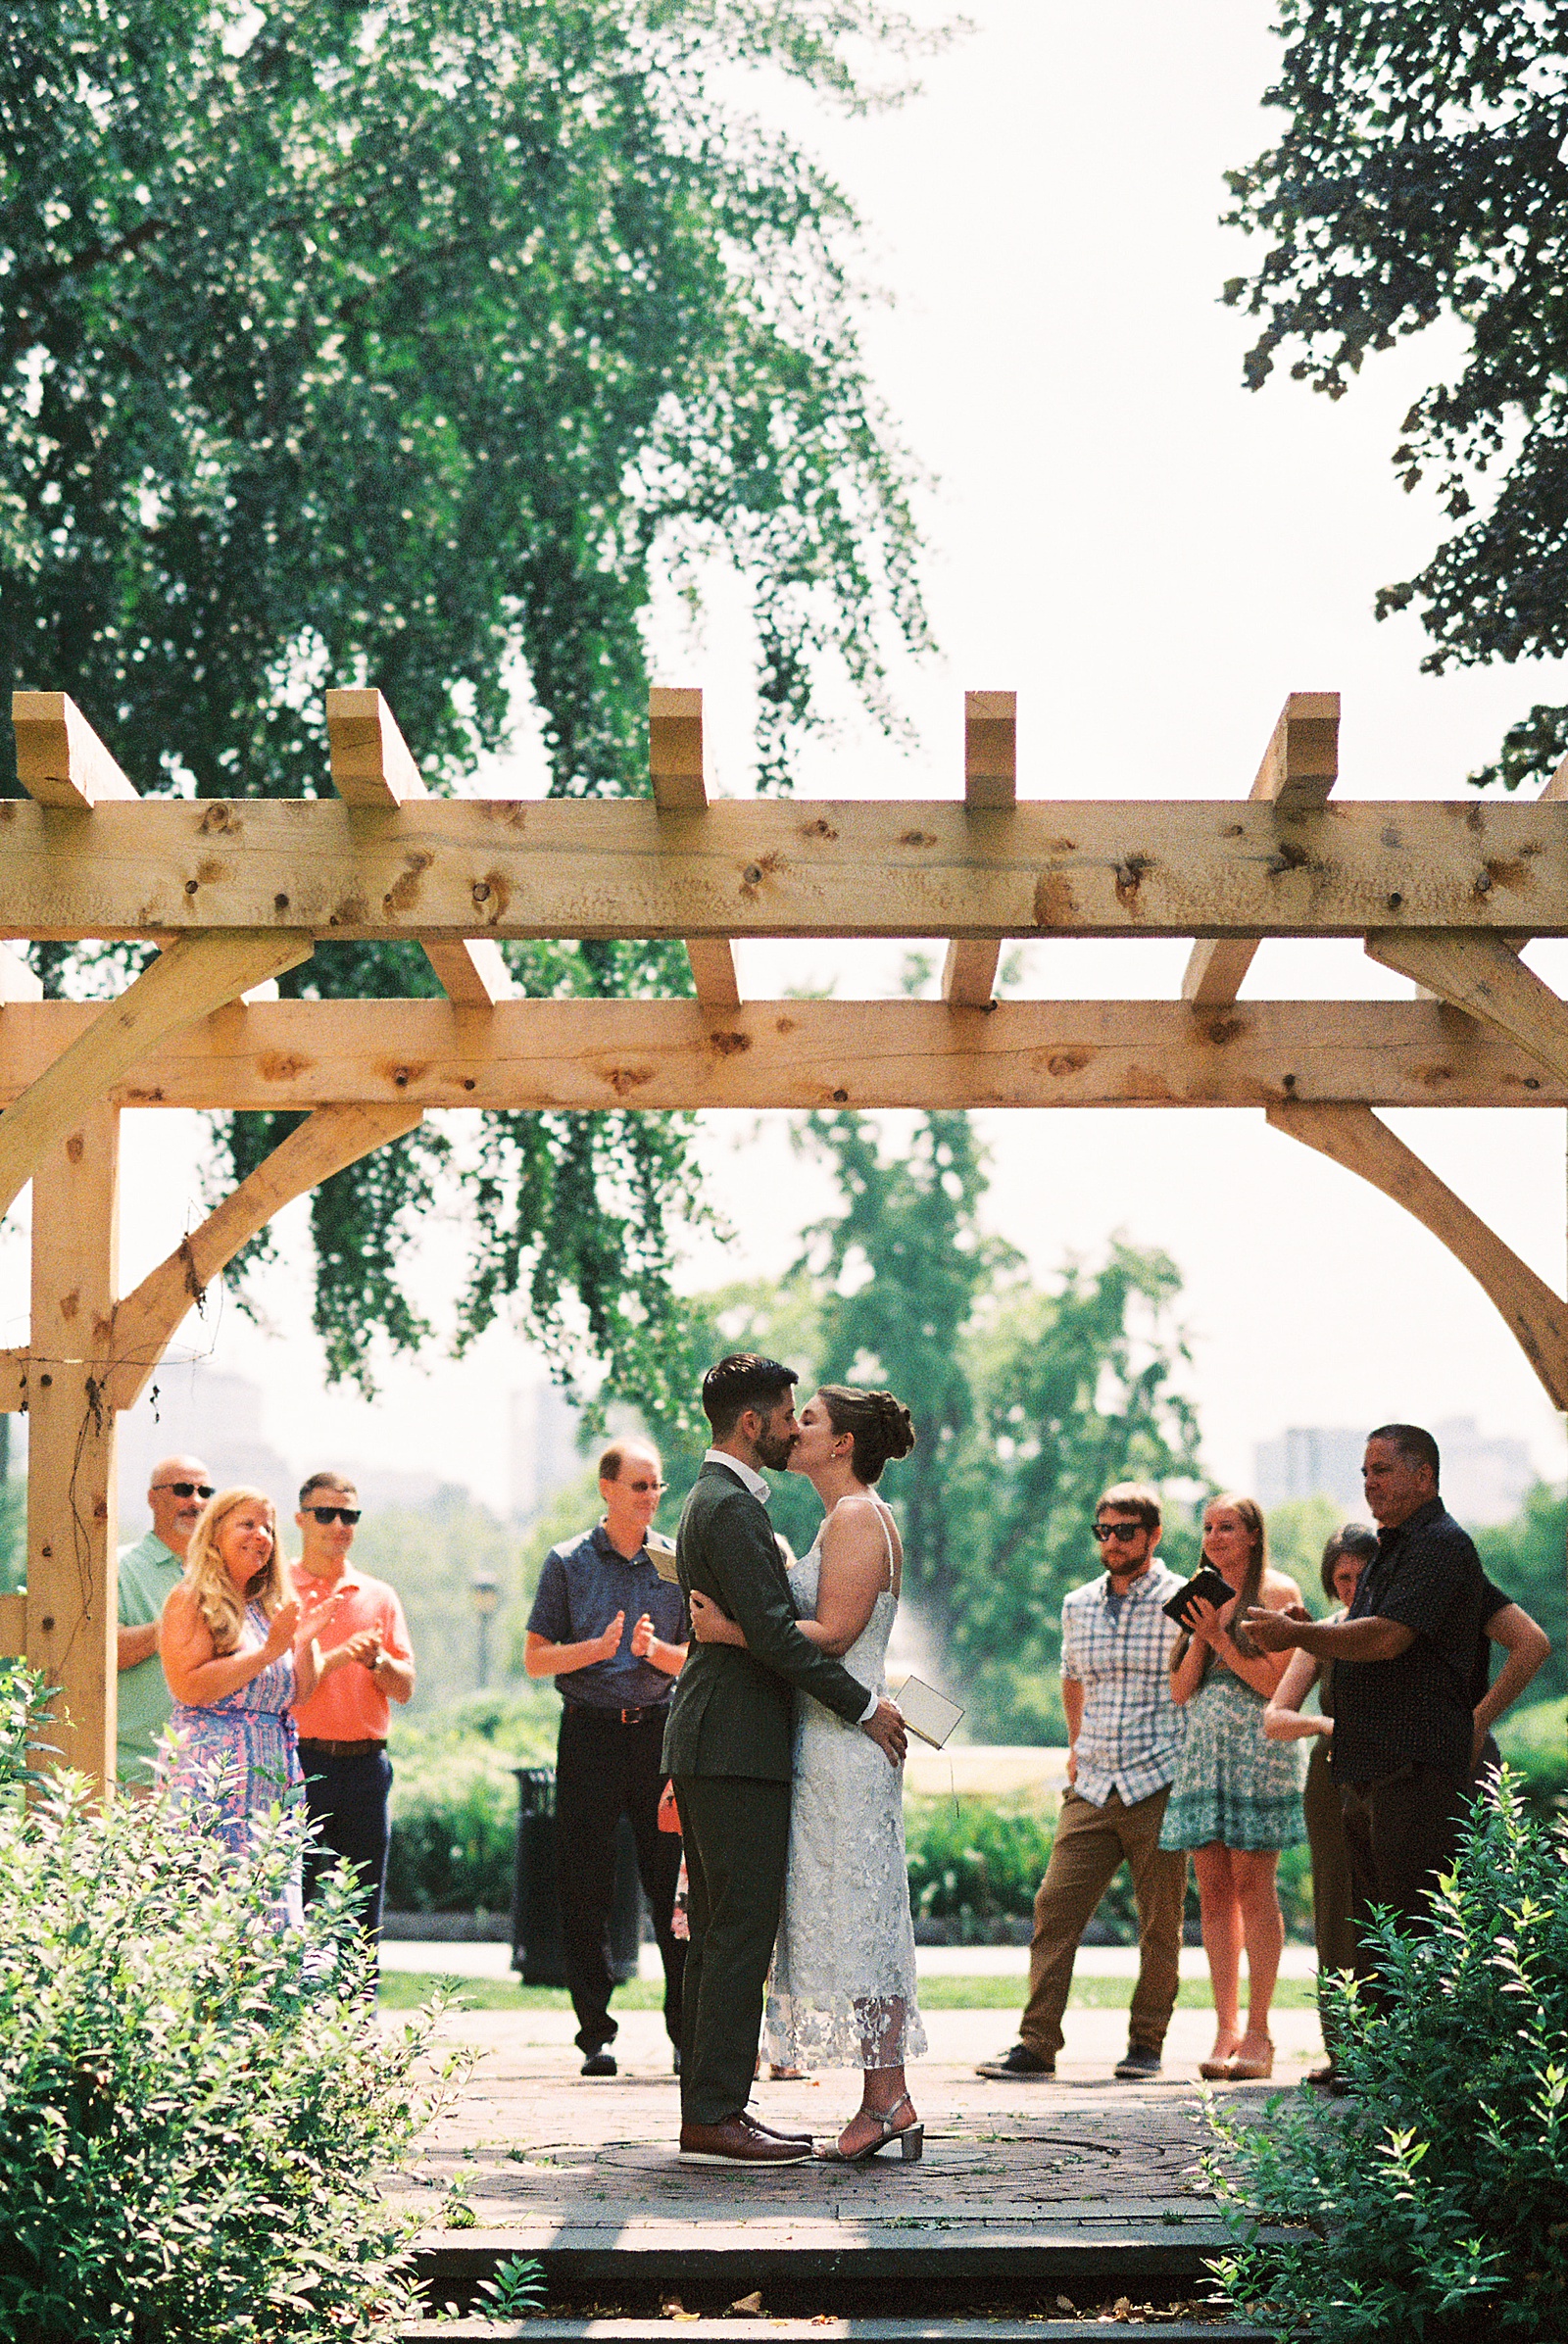 A bride and groom kiss at the end of their self-uniting ceremony while their families clap.